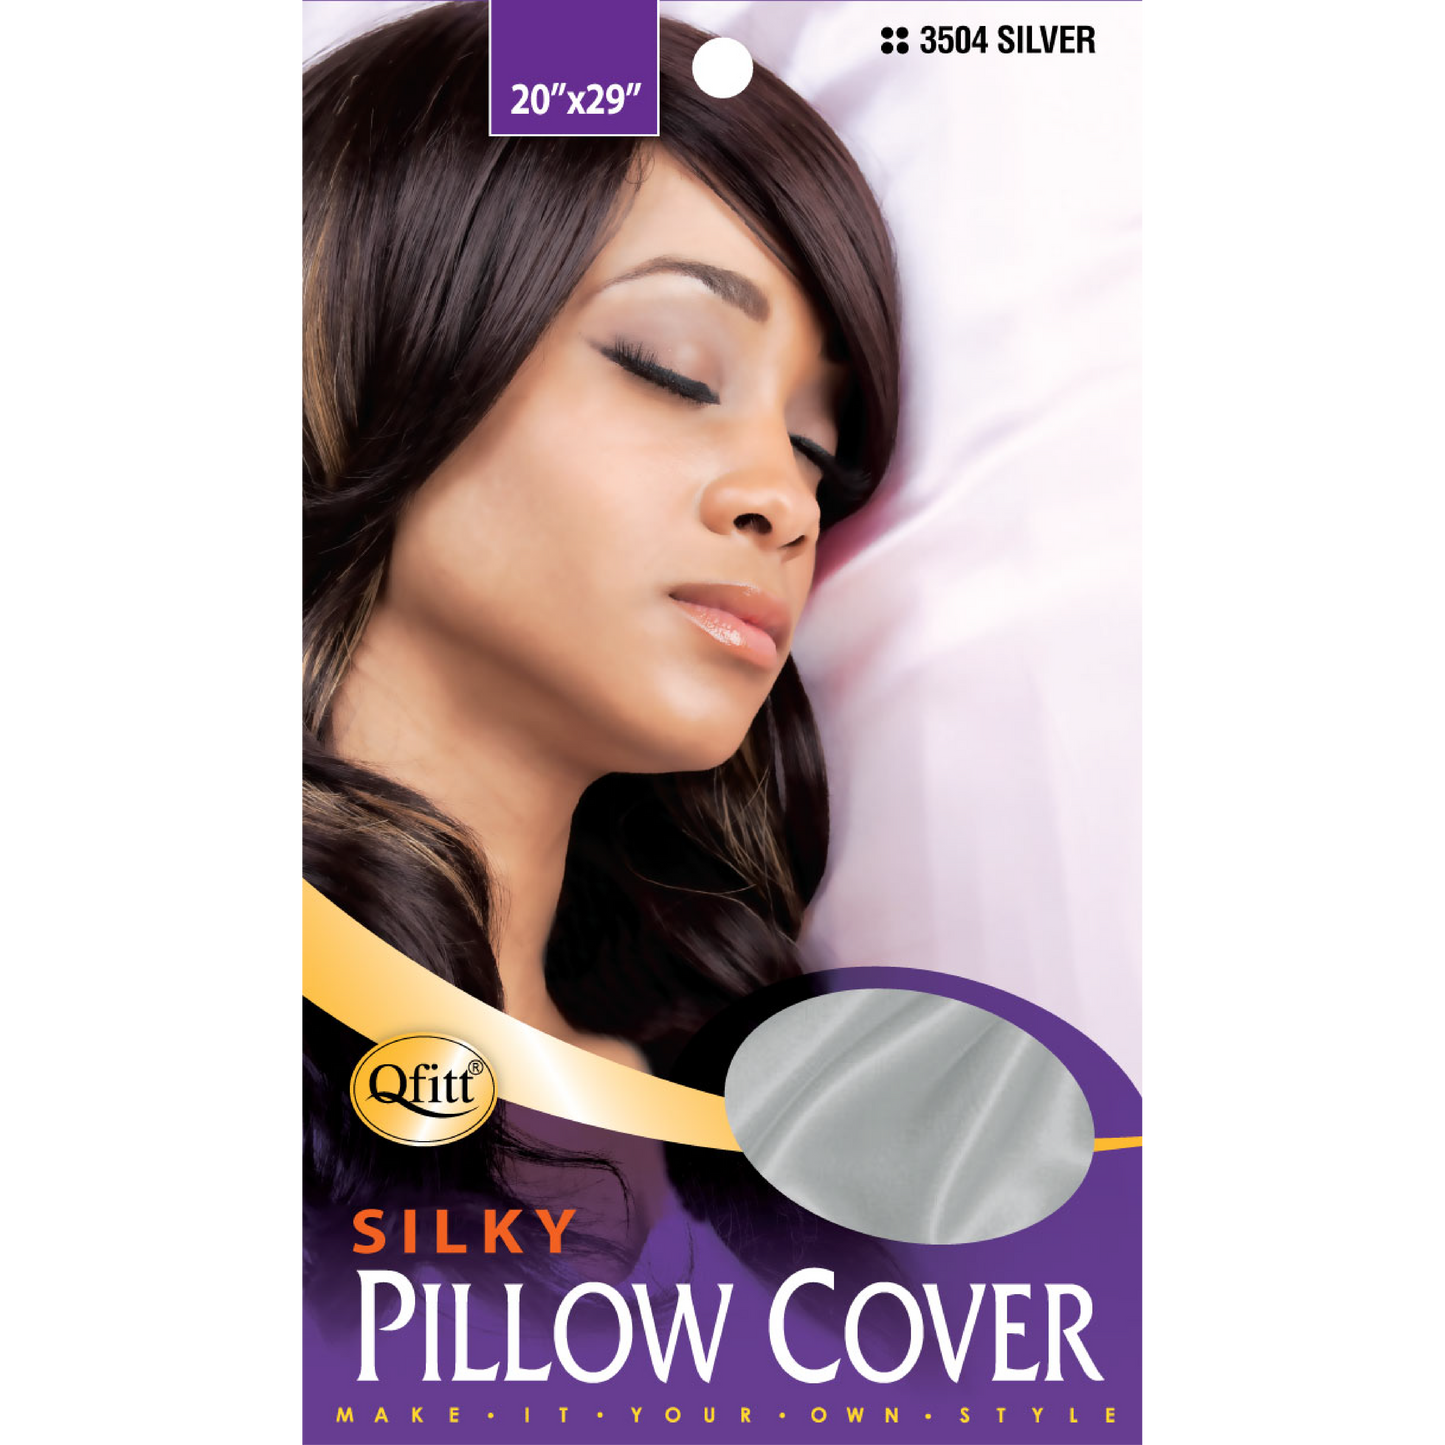 SILKY PILLOW COVER